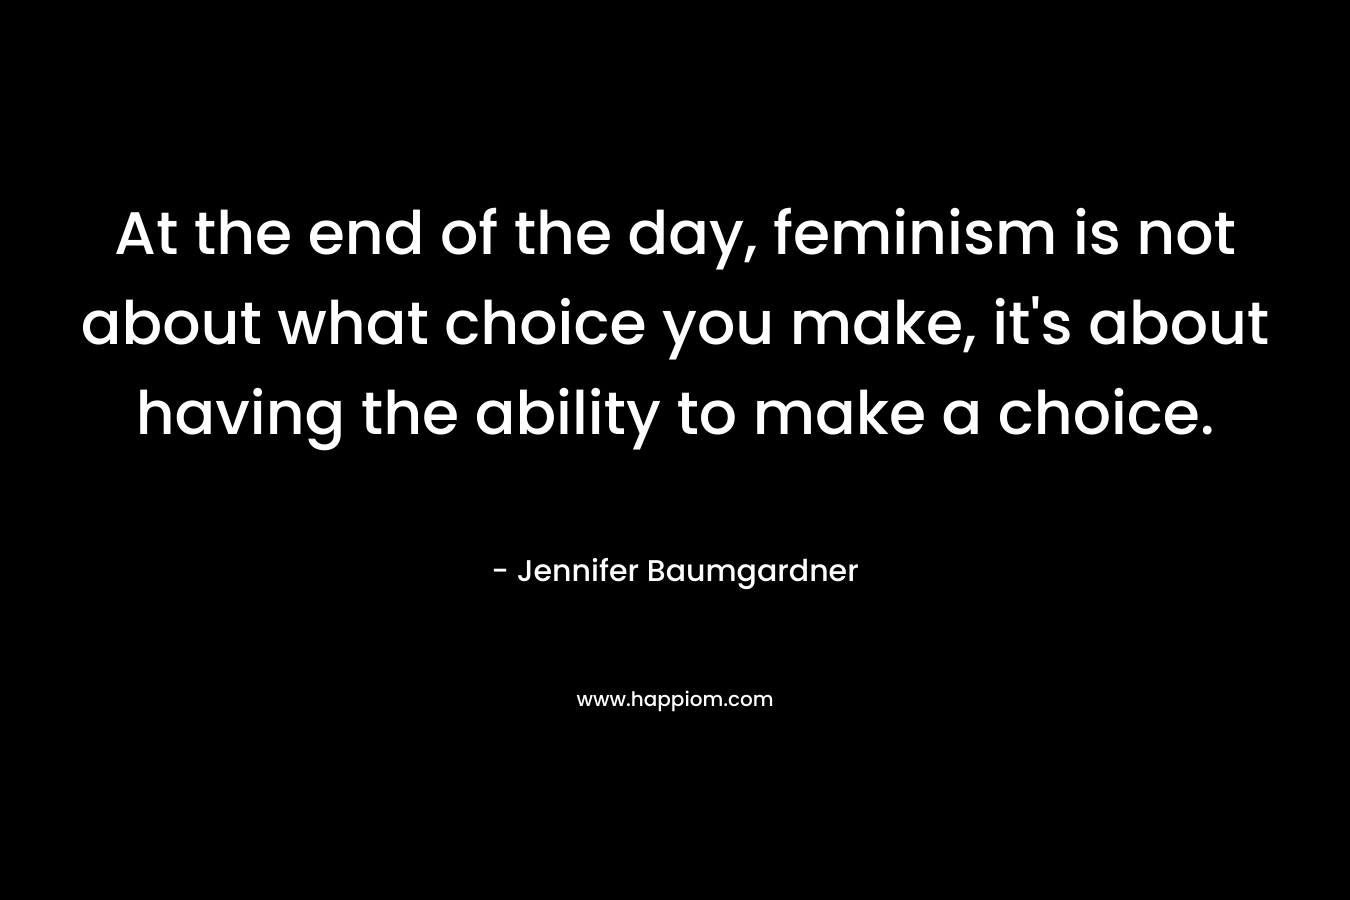 At the end of the day, feminism is not about what choice you make, it's about having the ability to make a choice.